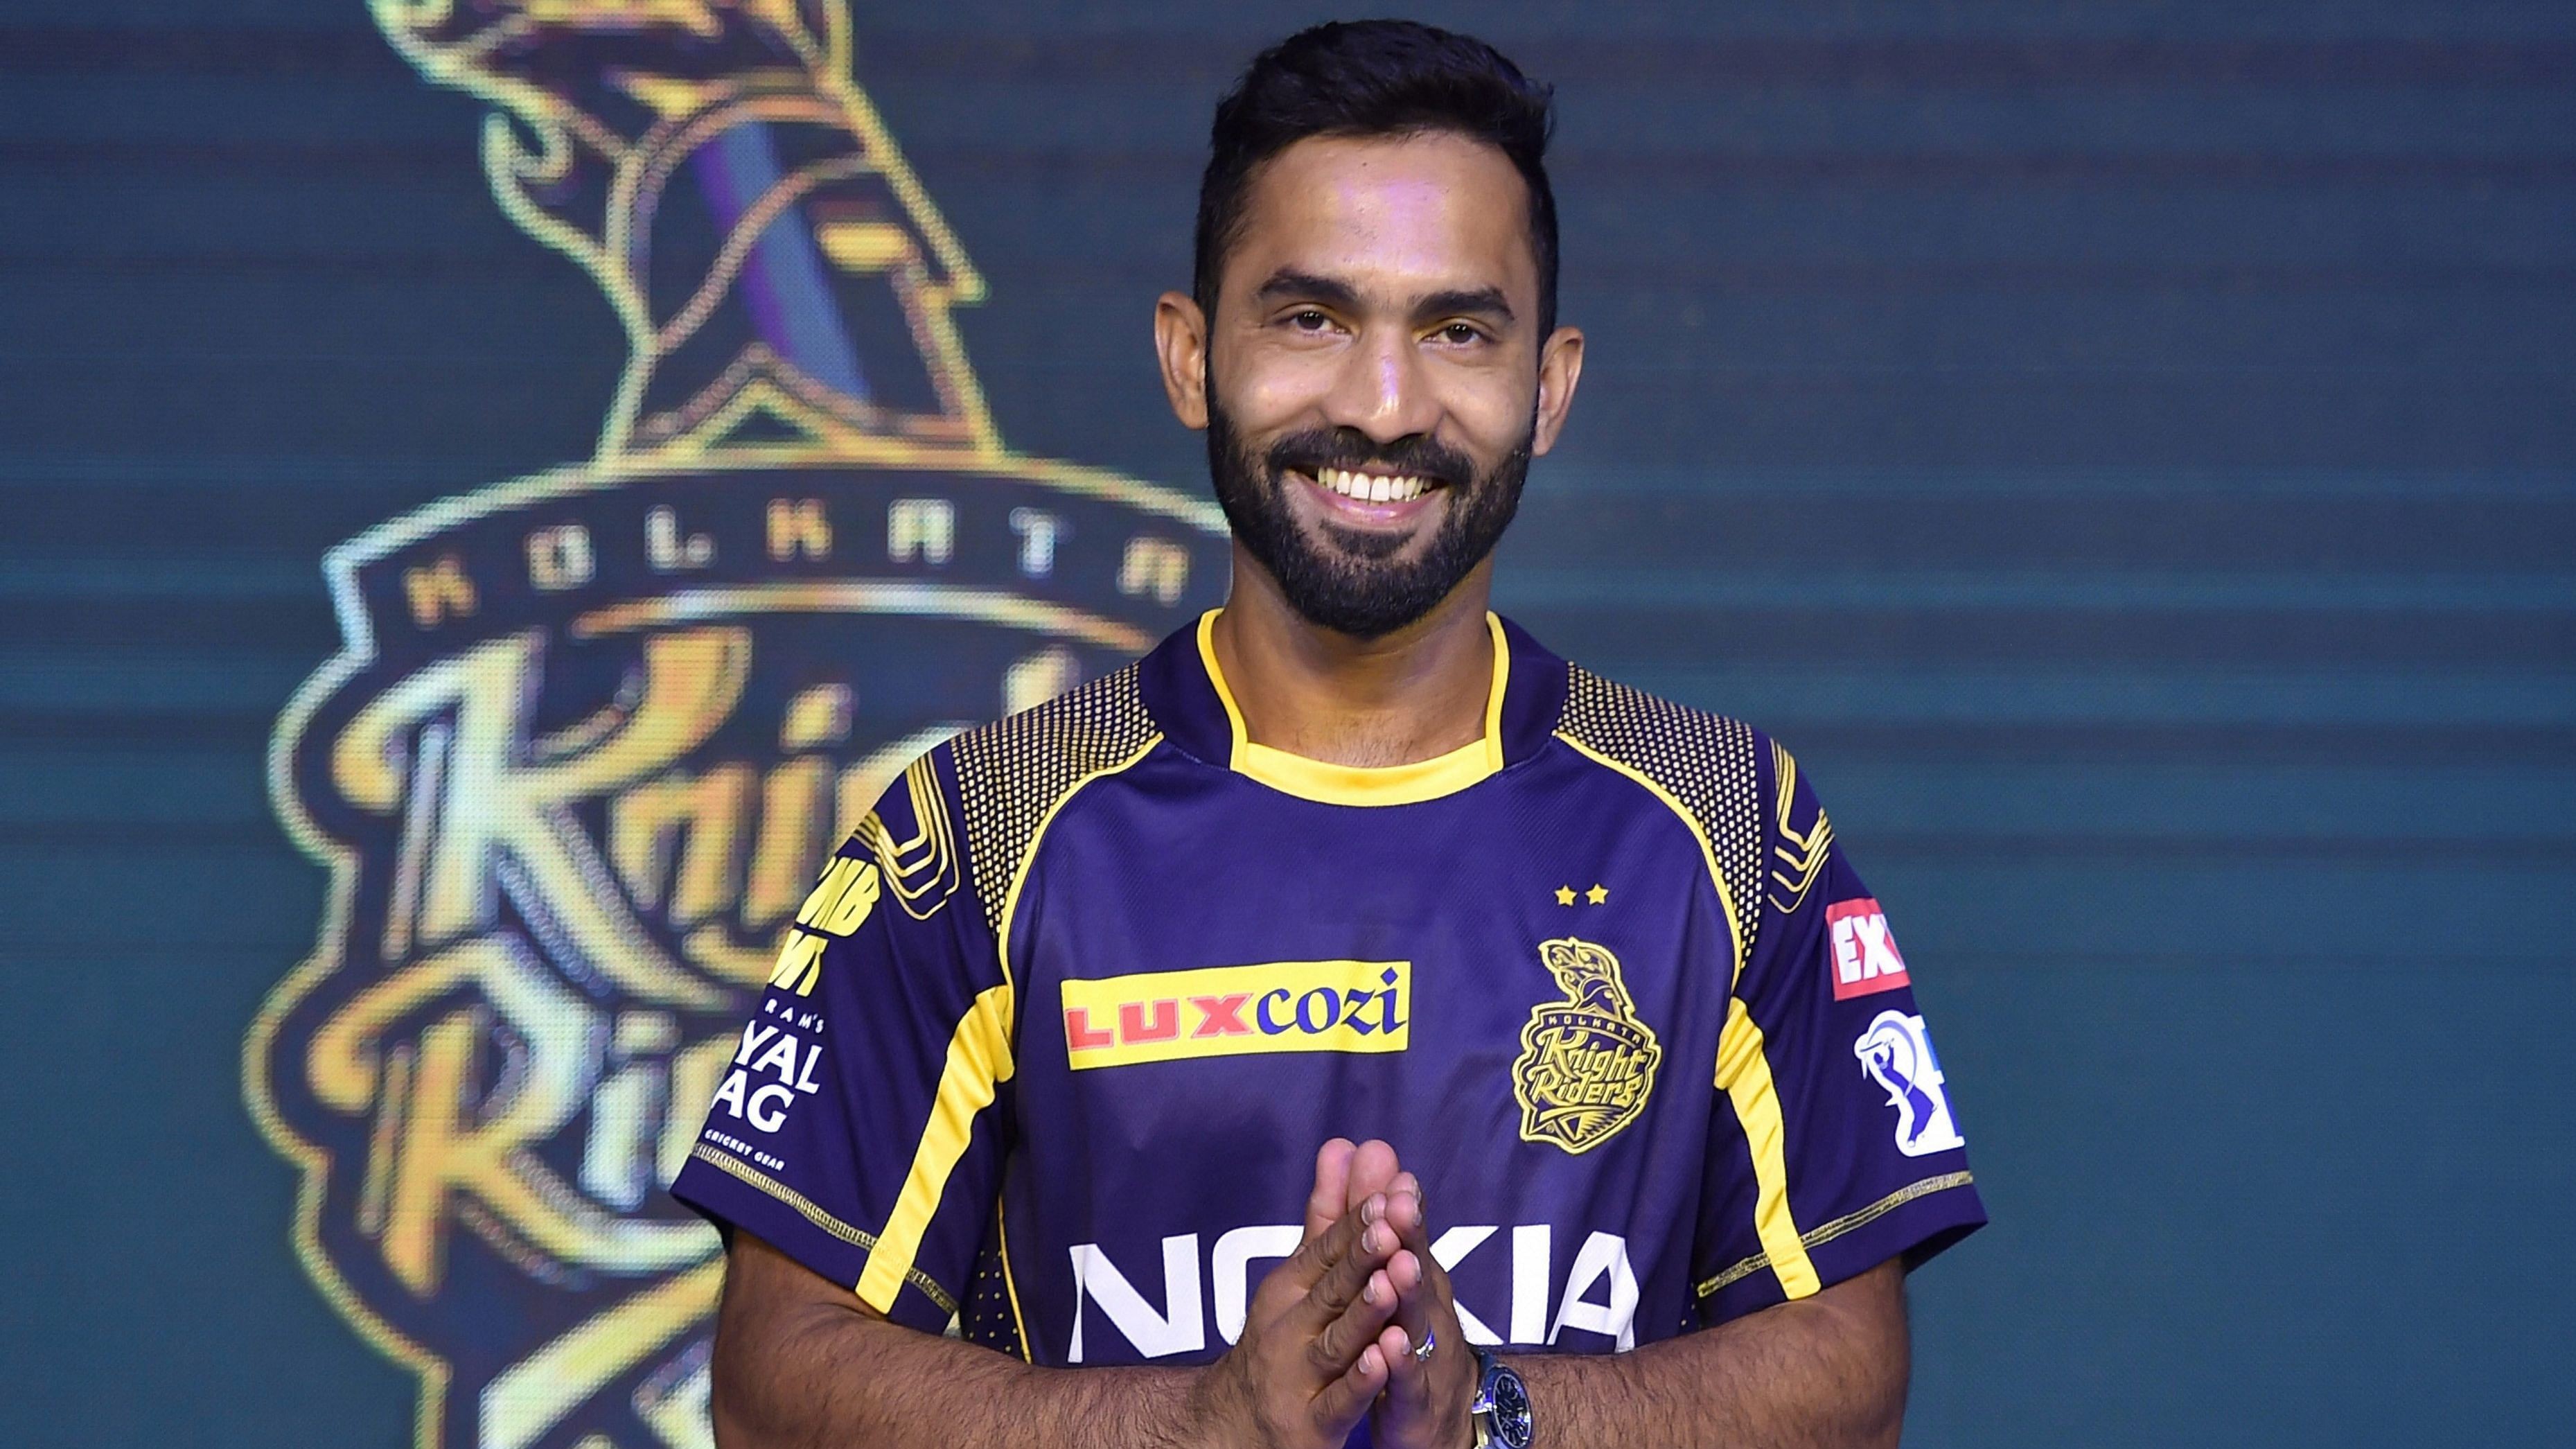 IPL 2020: Dinesh Karthik hoping to give KKR fans a lot to cheer about during IPL 13